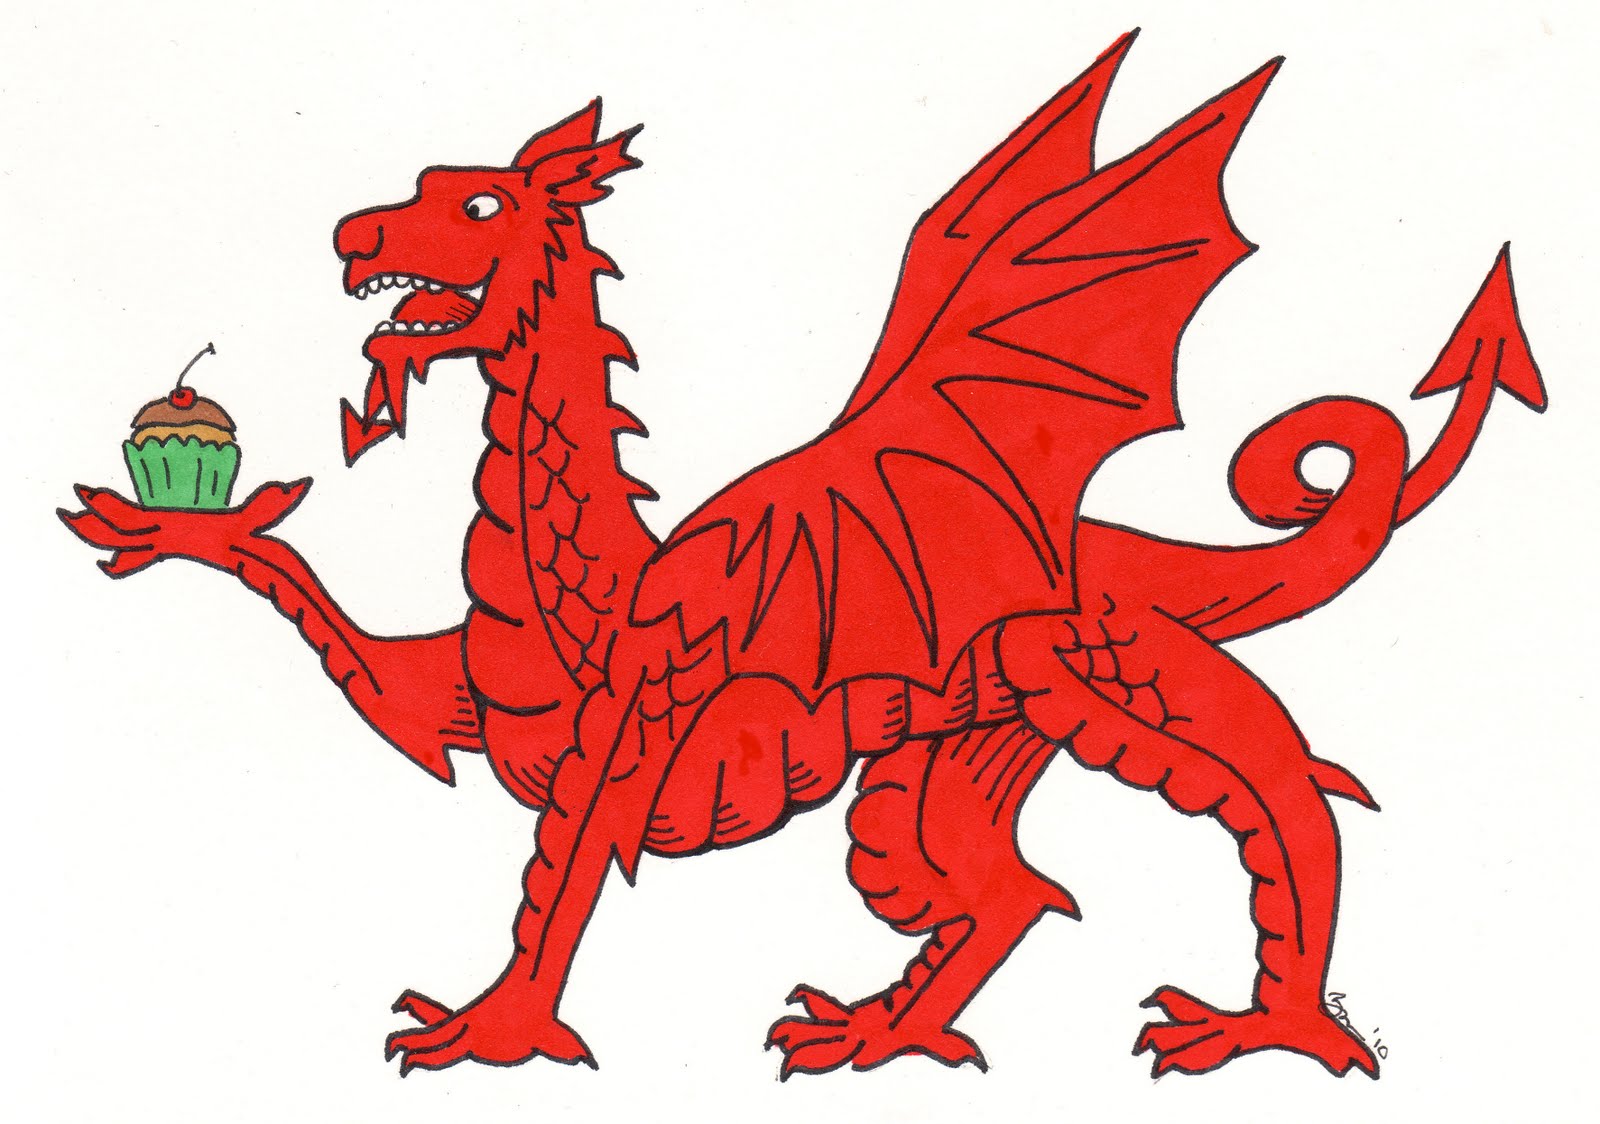 Illustrations by Em: The Red Dragon